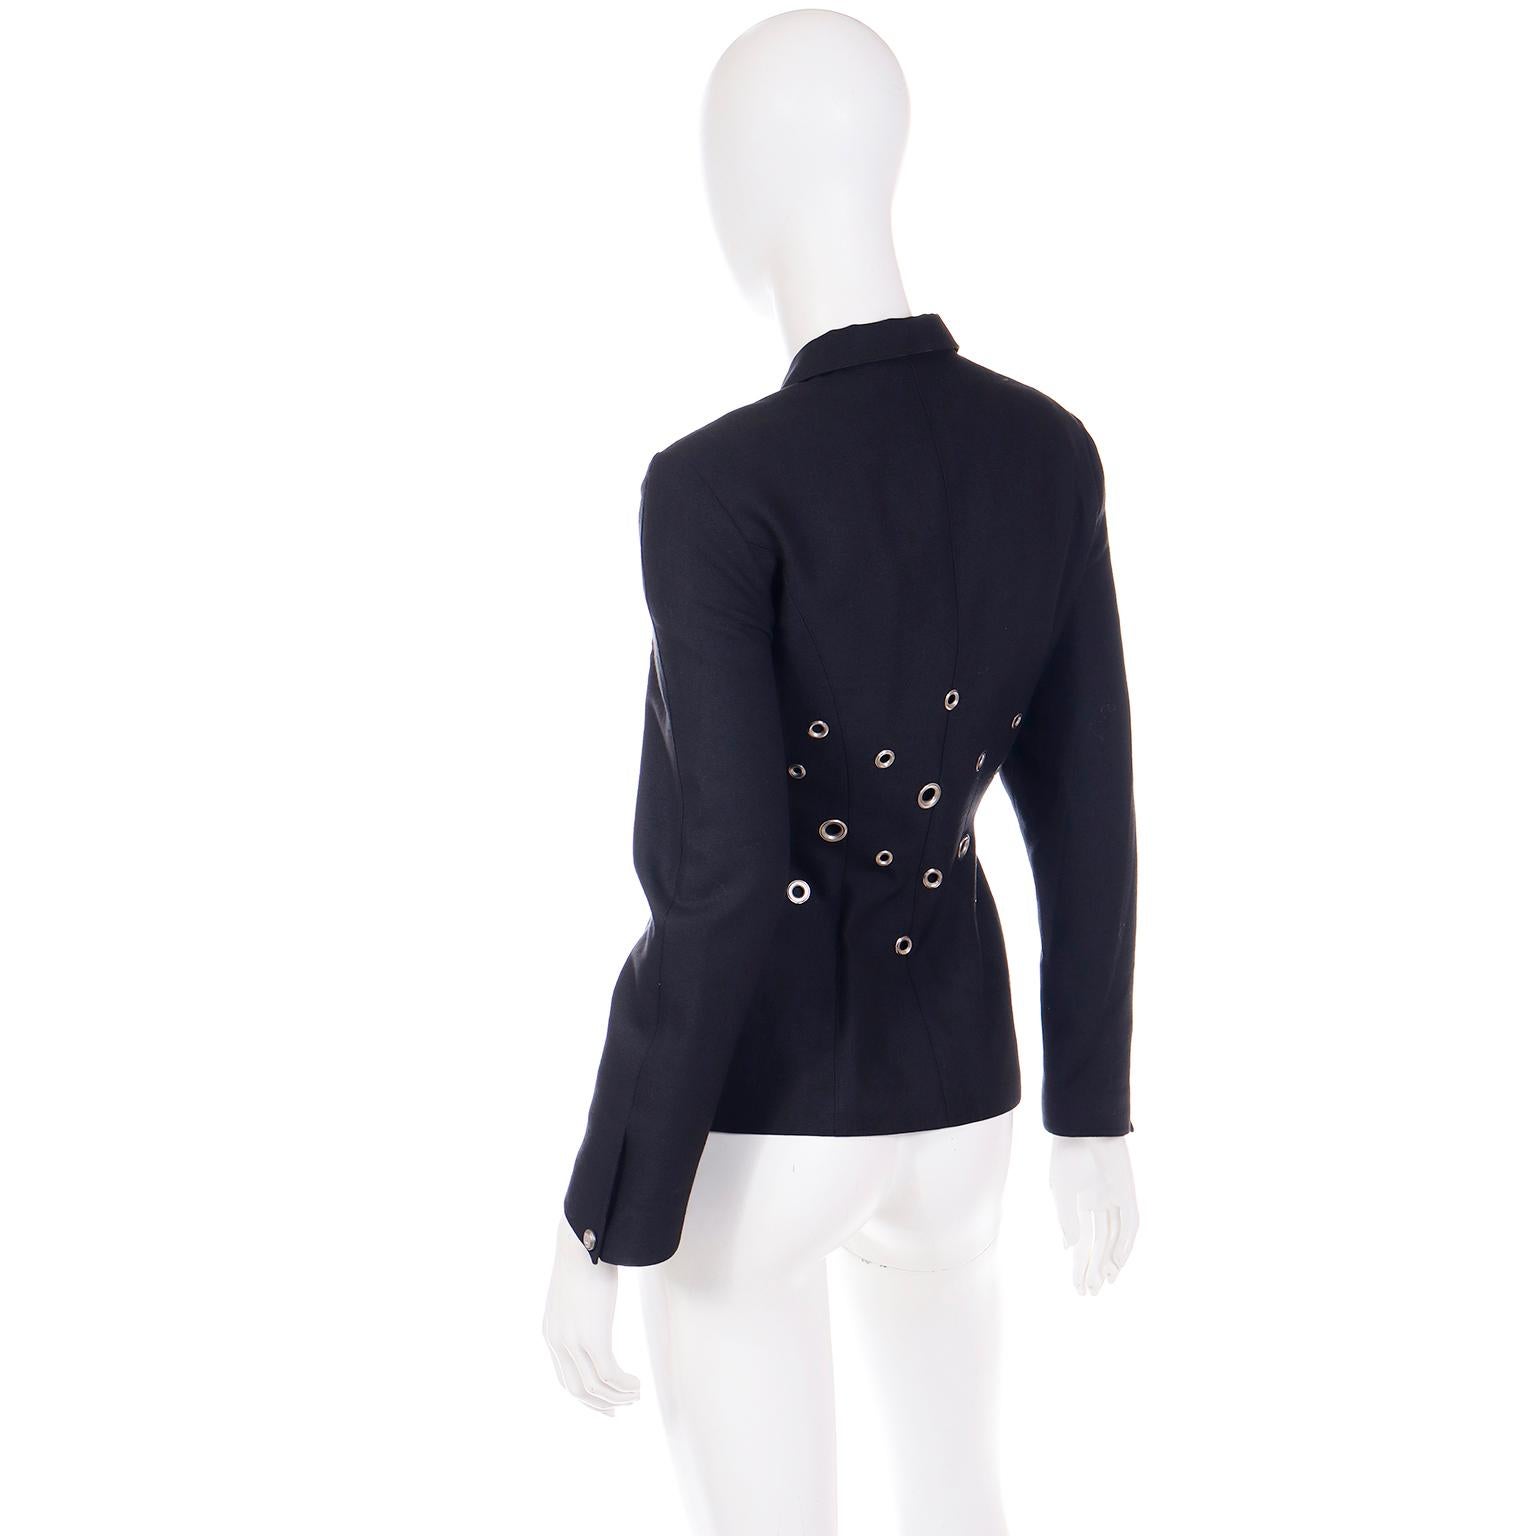 Thierry Mugler Paris Vintage Grey Black Jacket With Silver Grommets 2